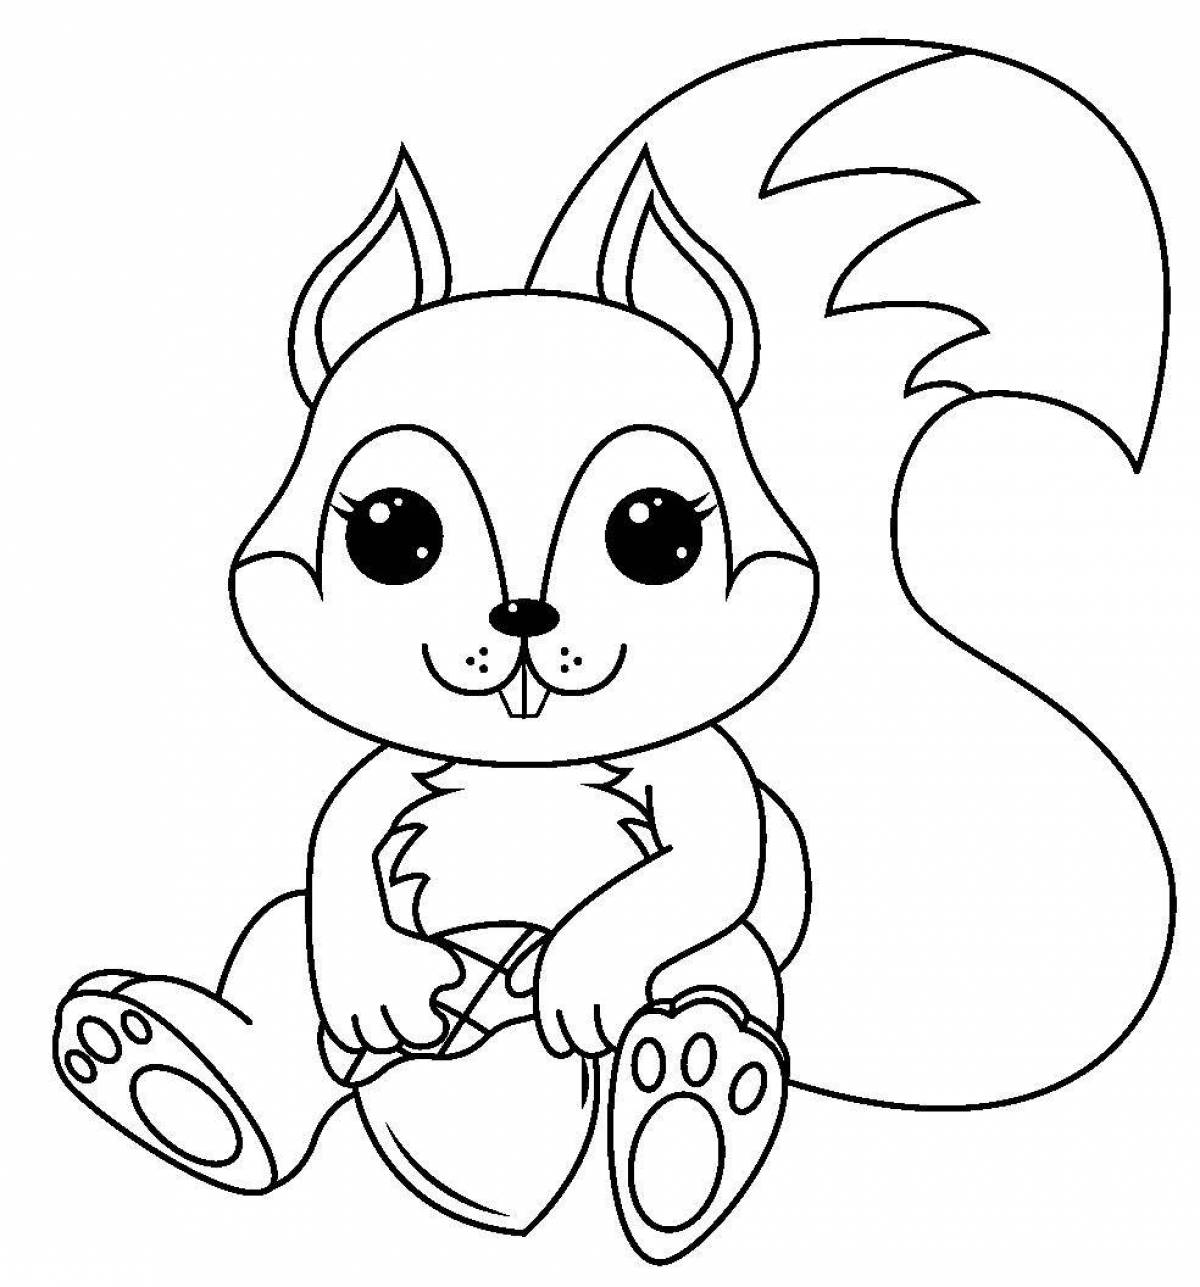 Playful drawing of a squirrel for children